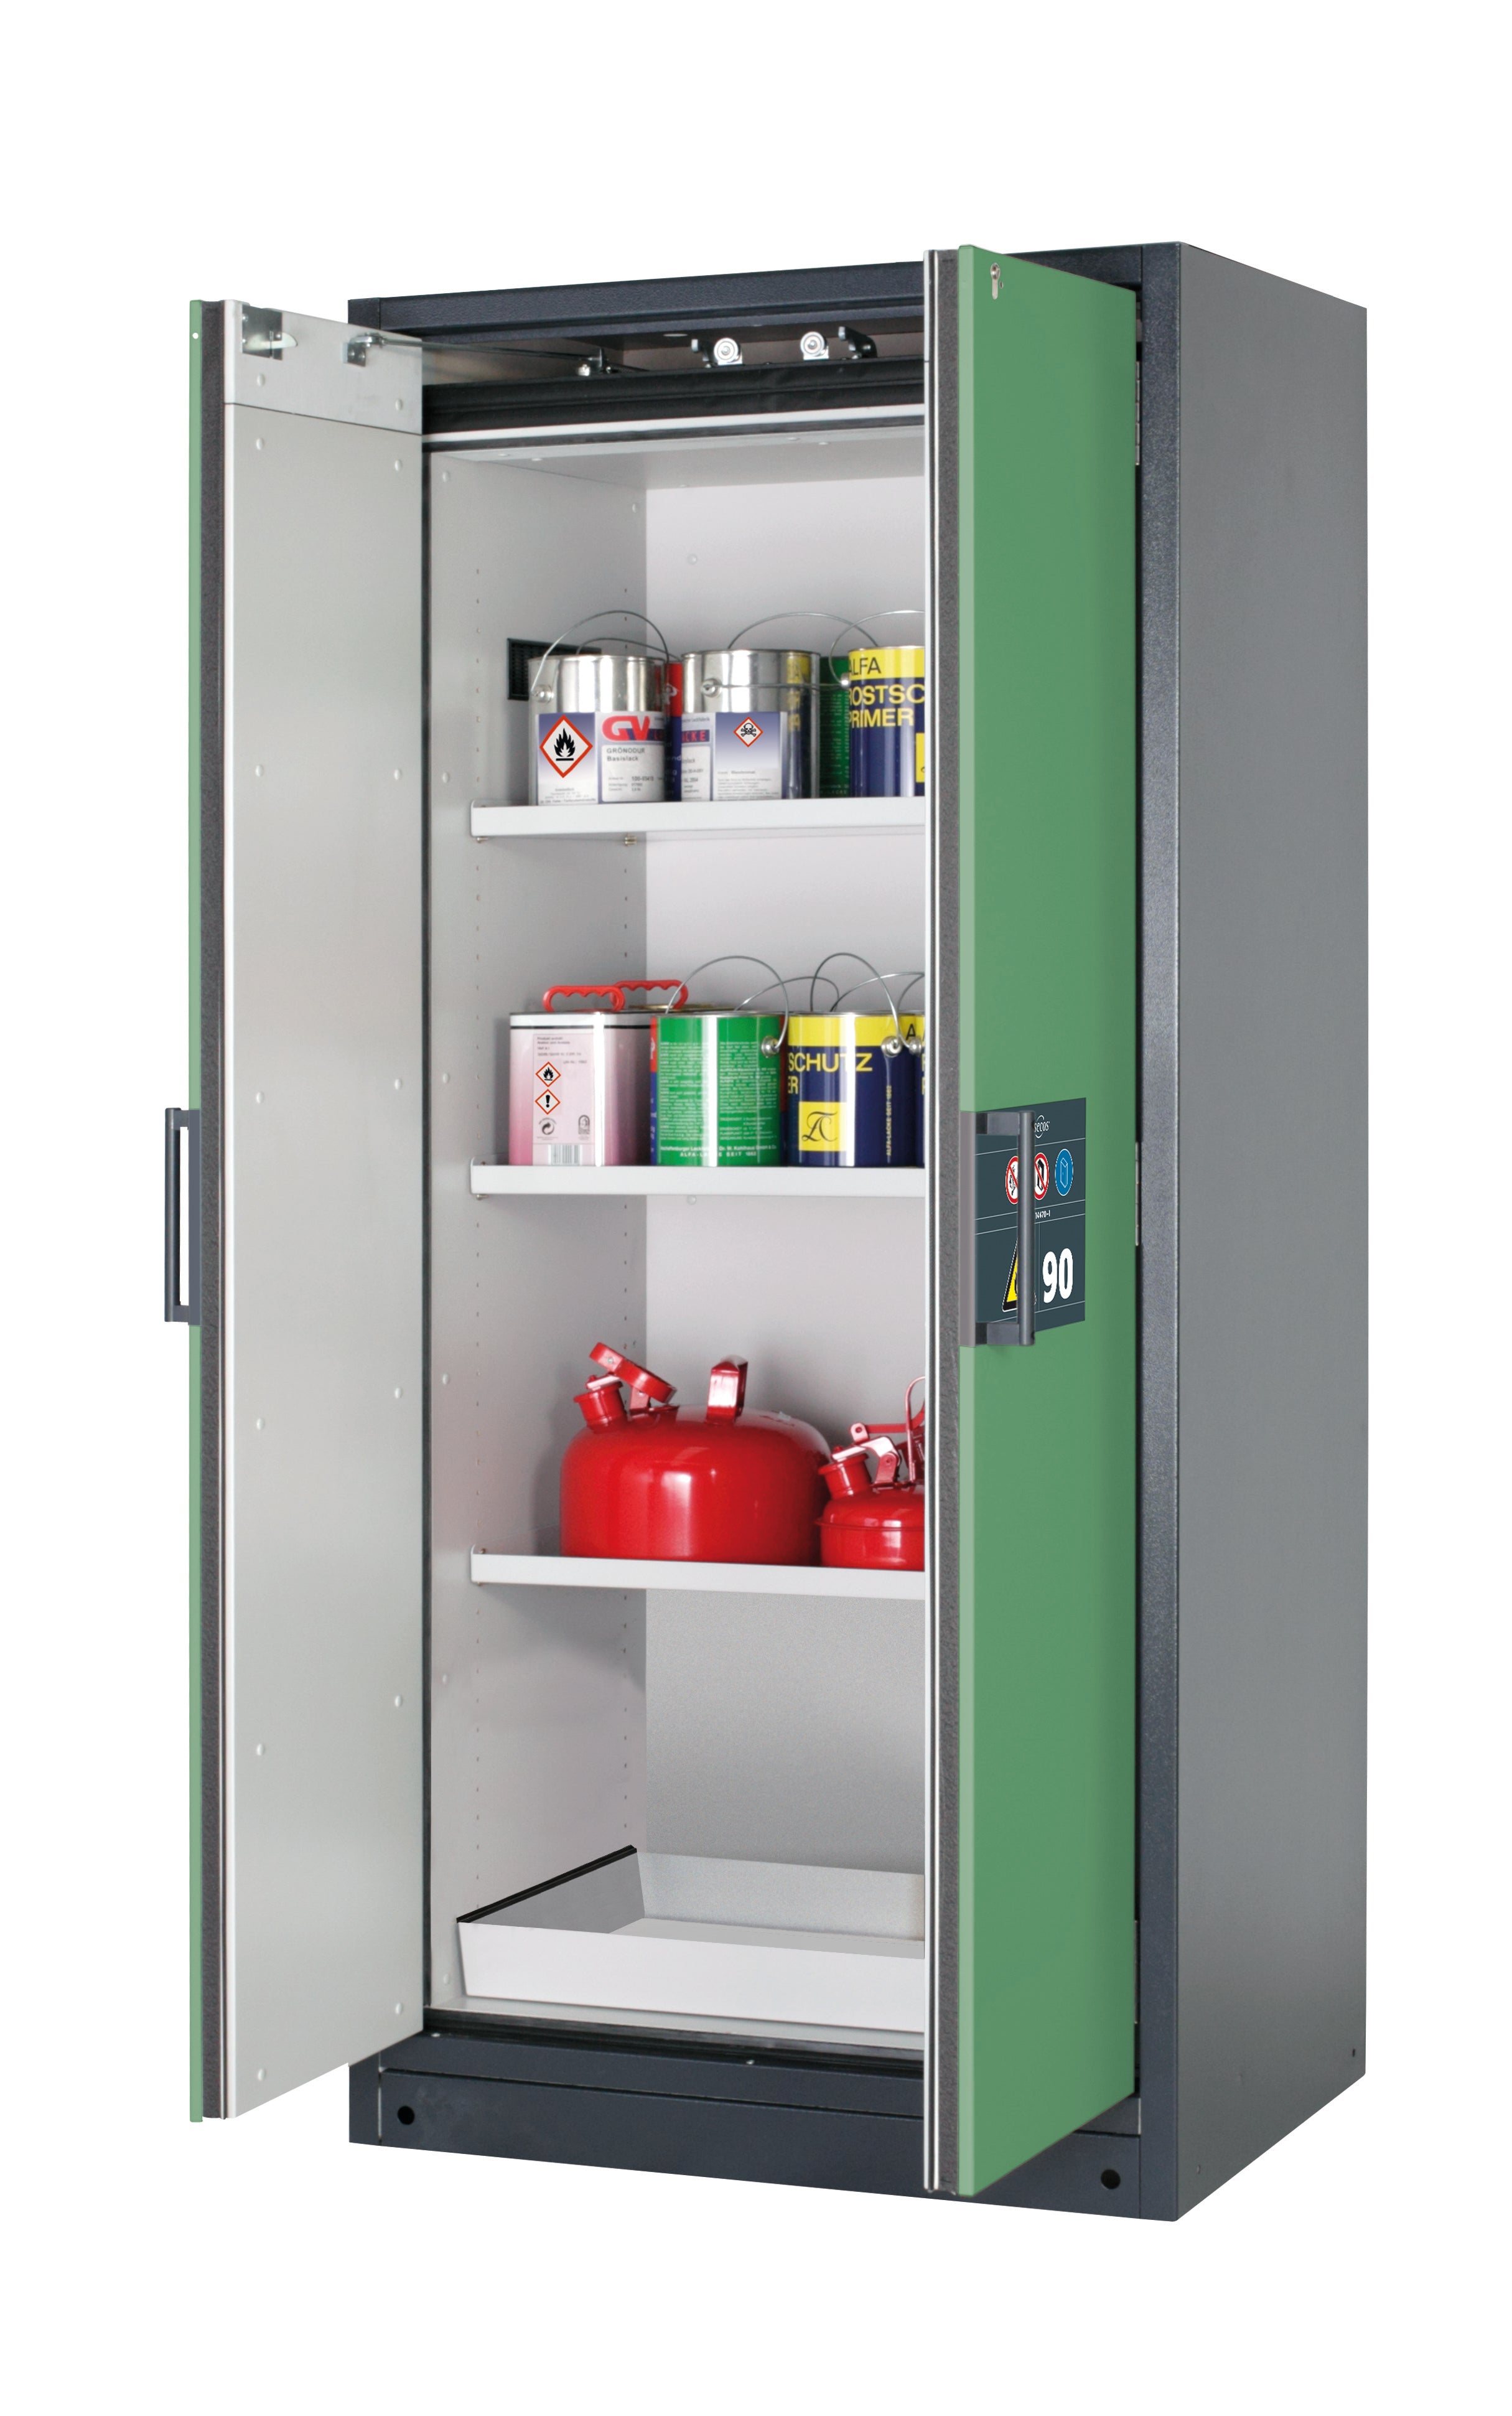 Type 90 safety storage cabinet Q-CLASSIC-90 model Q90.195.090 in reseda green RAL 6011 with 3x shelf standard (sheet steel),